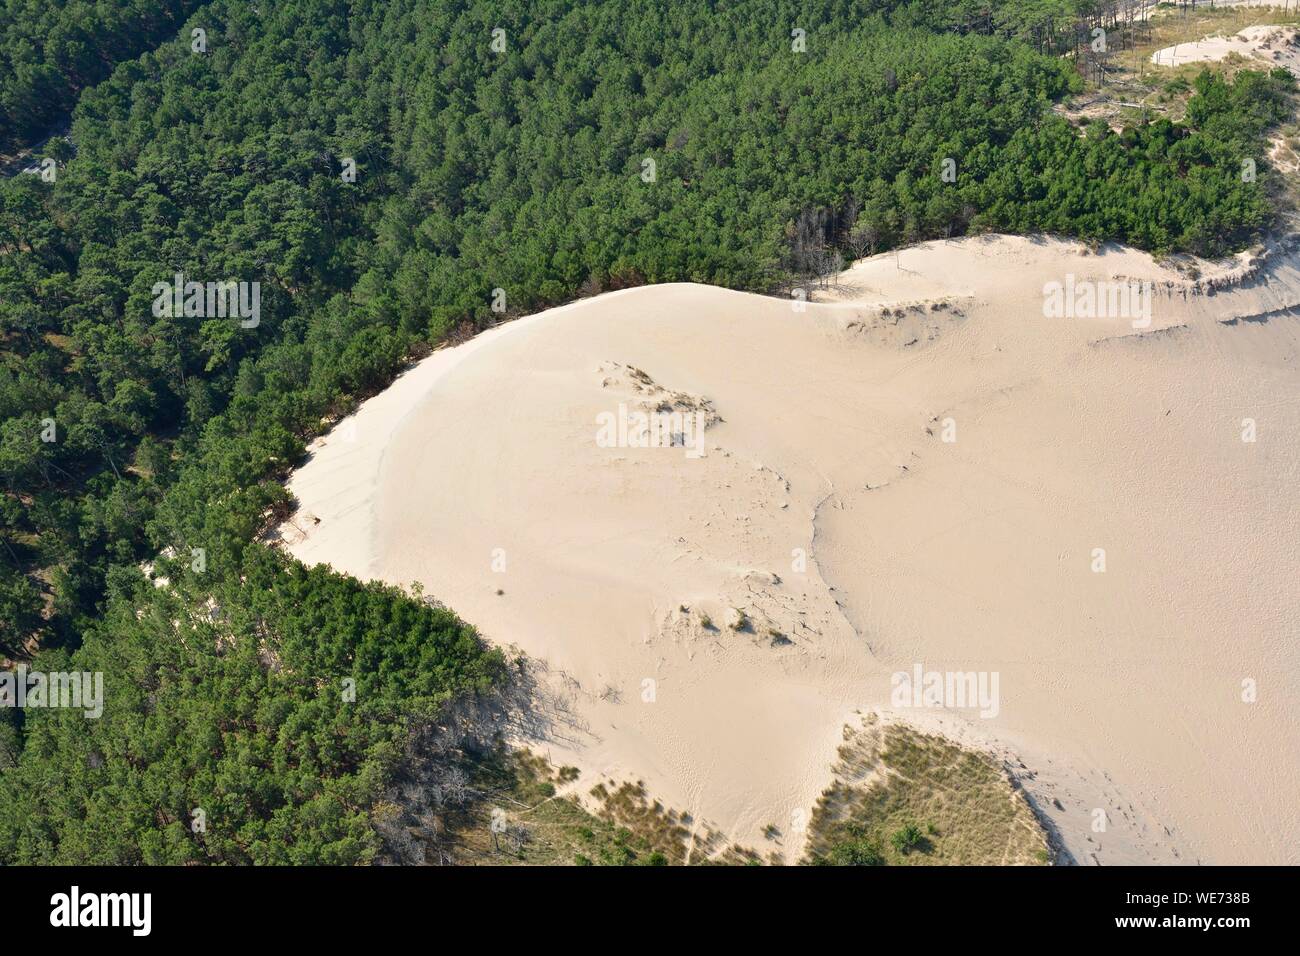 France, Gironde, Bassin d'Arcachon, Landes Forest, Dune du Pilat (the Great Dune of Pyla) (aeria view) Stock Photo